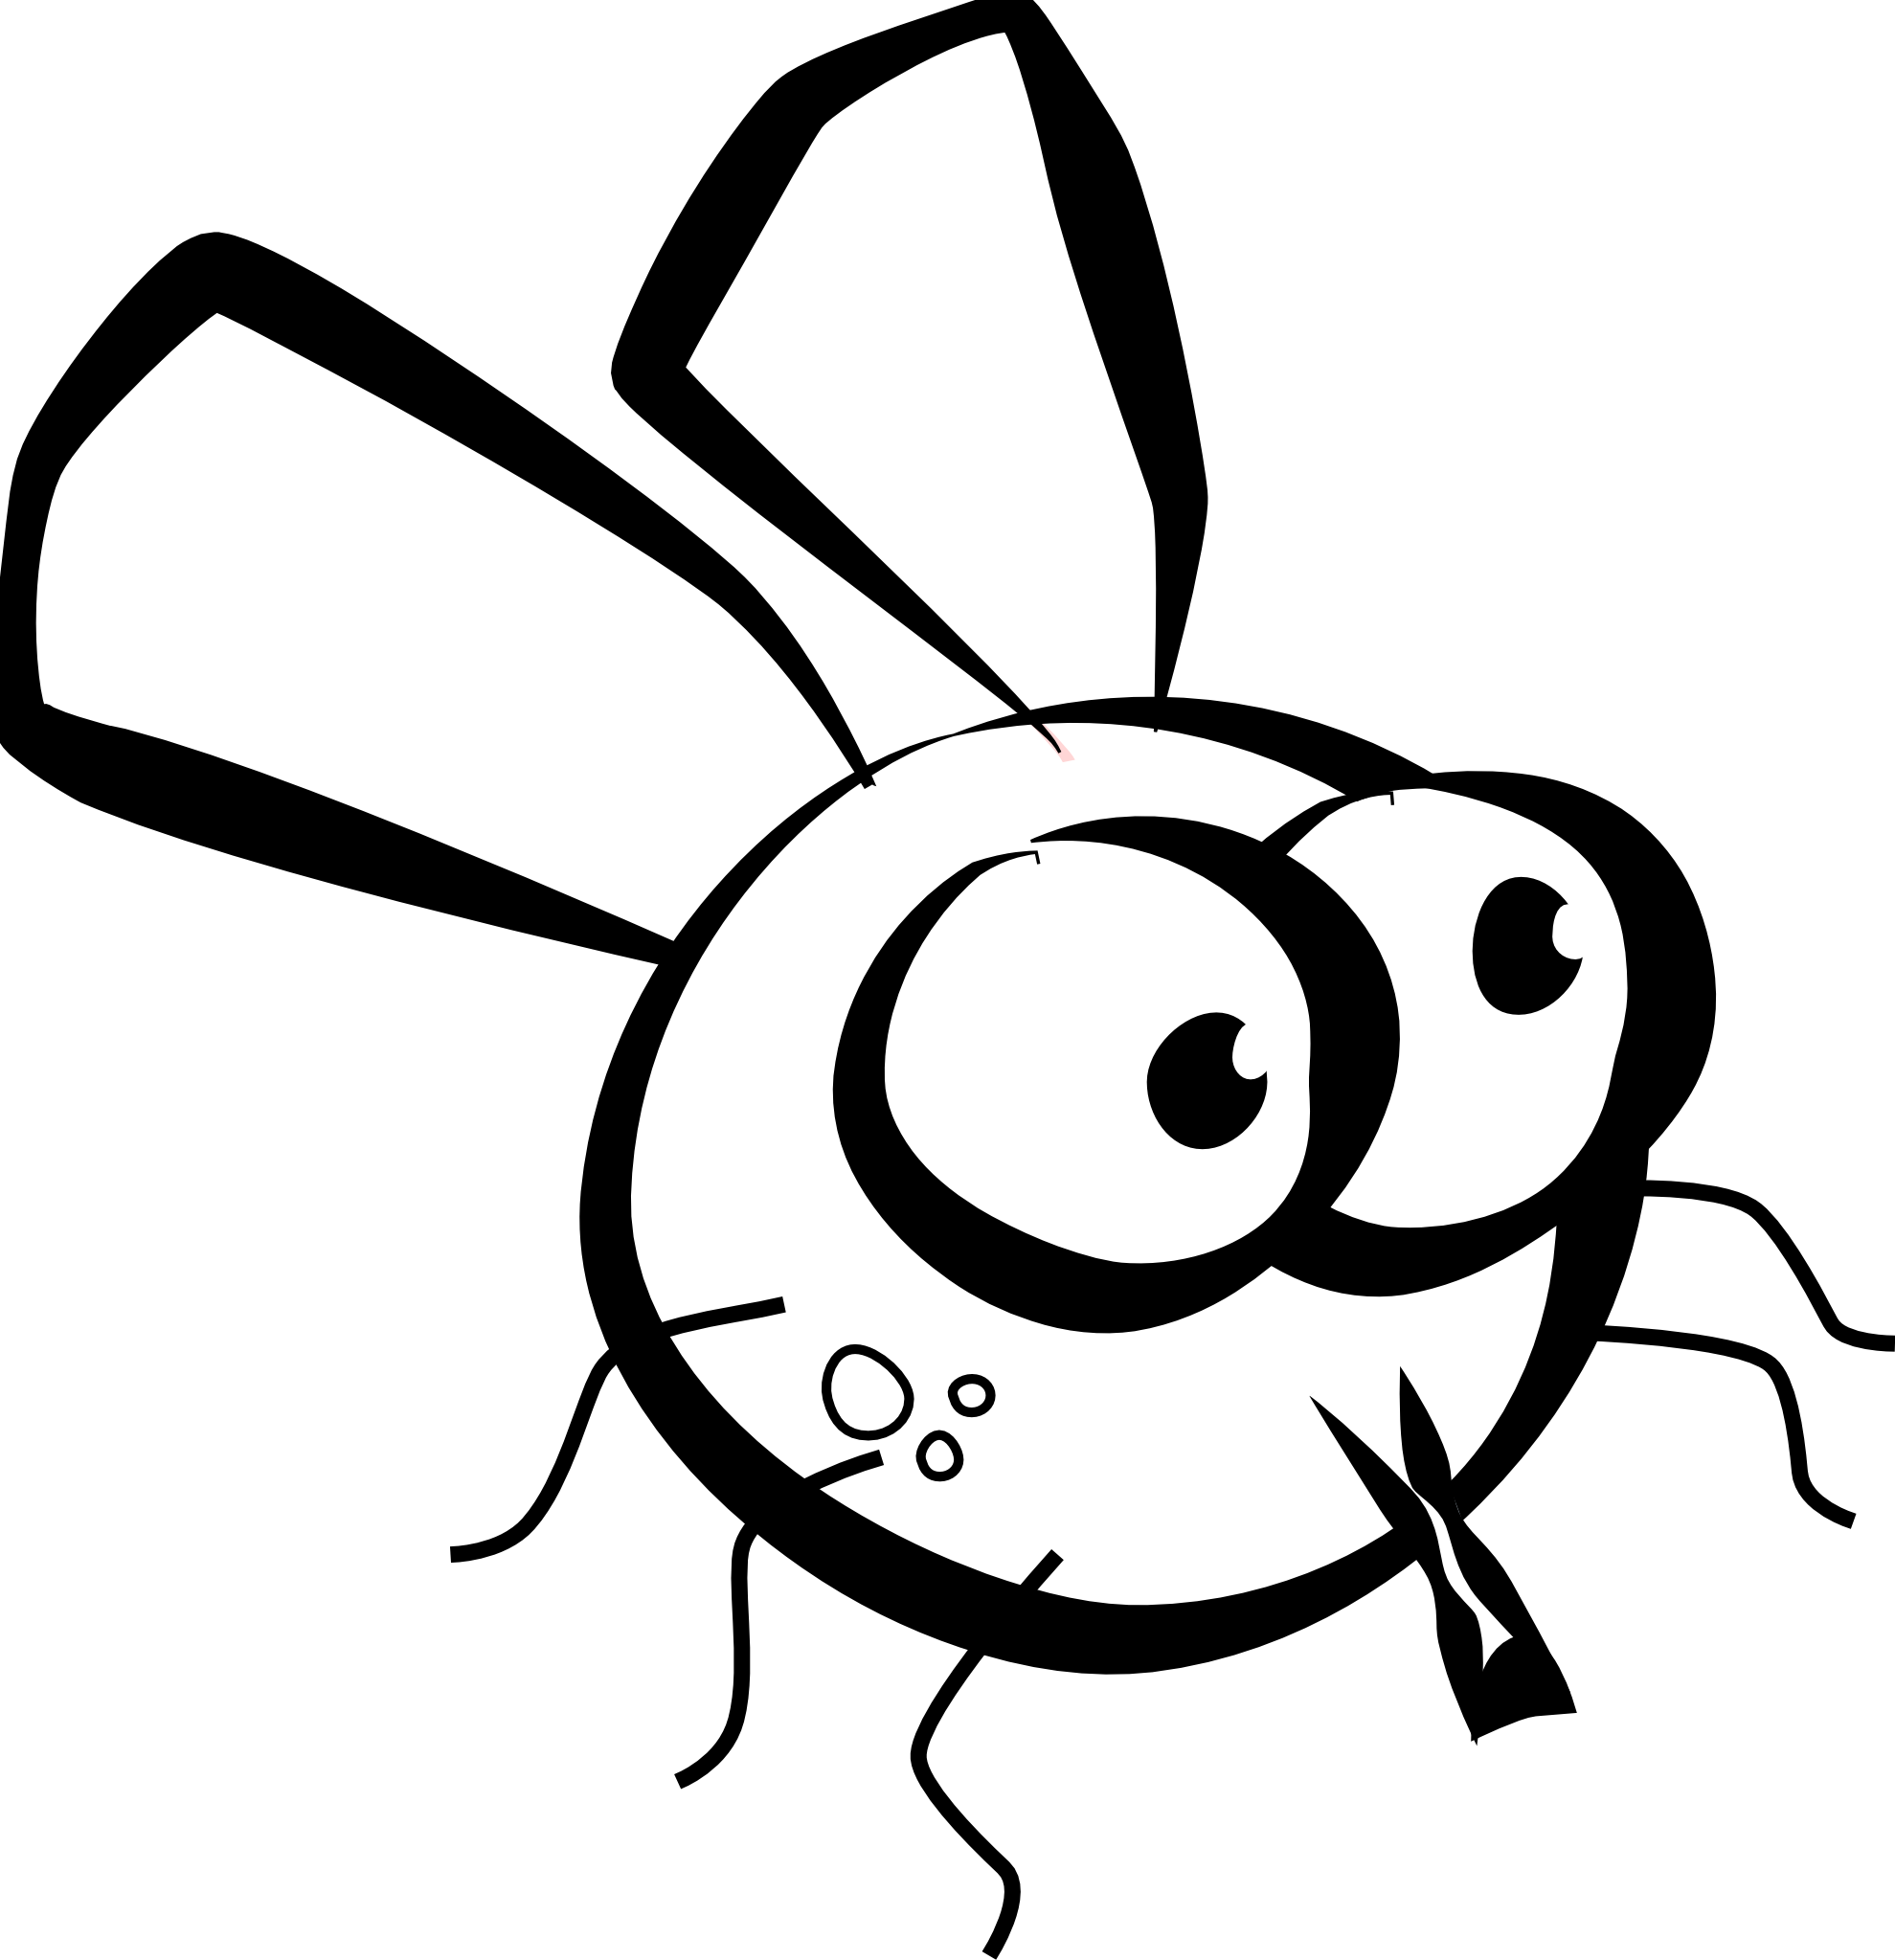 Fly Clipart Black And White Clipart Panda Free Clipart Images